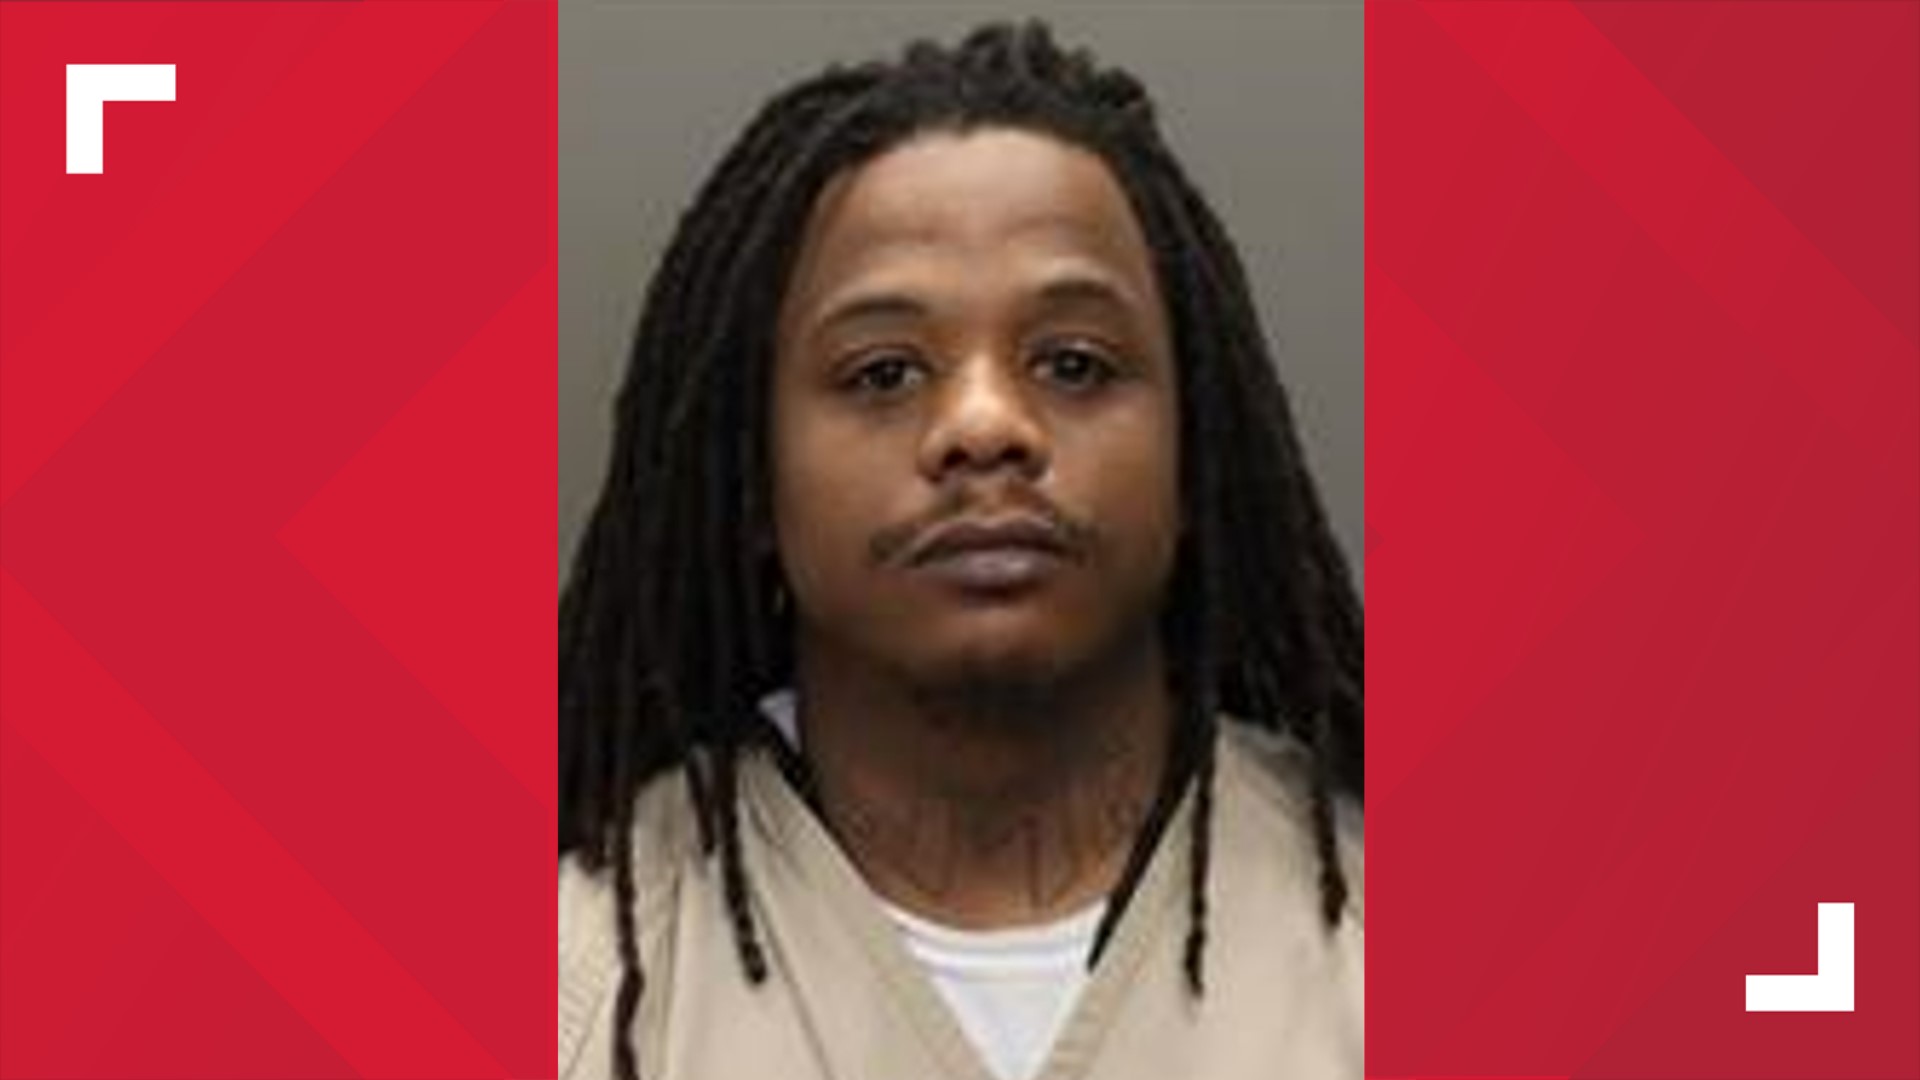 Frederick Carr, 31, is currently being held in the Franklin County Correction Center and is charged with one count each of attempted murder and aggravated robbery.